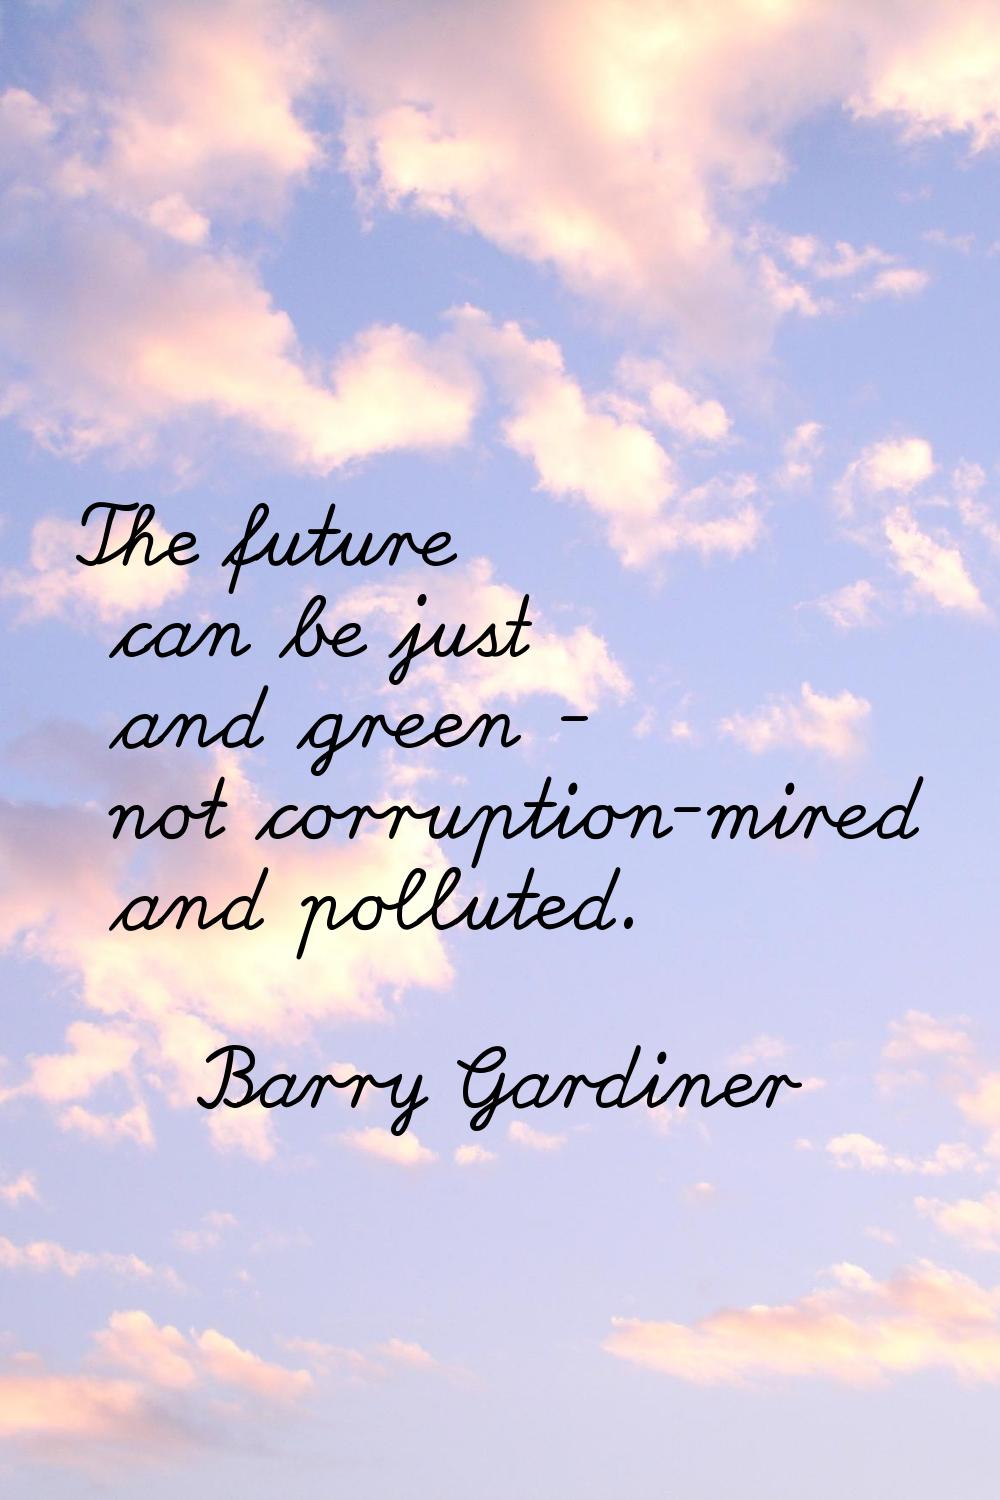 The future can be just and green - not corruption-mired and polluted.